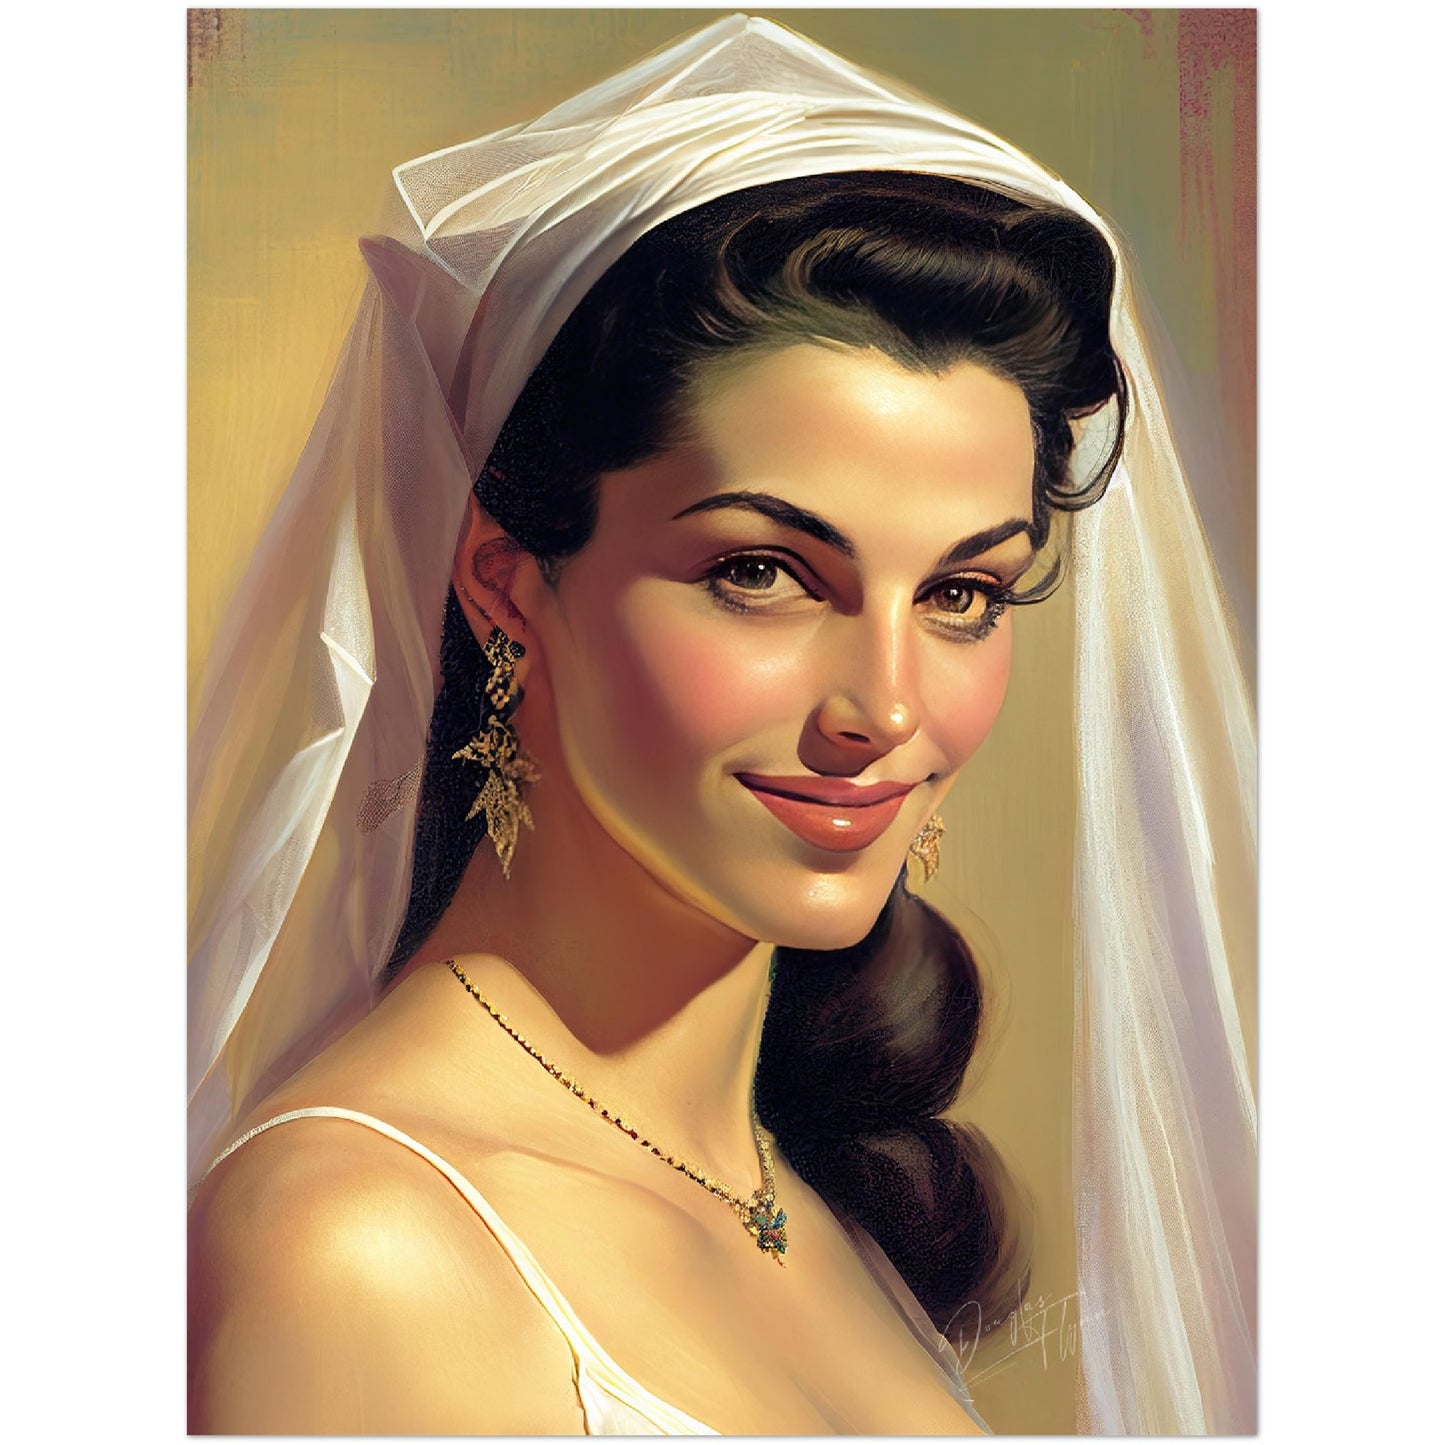 »Bridal Beauty and Style« retro poster